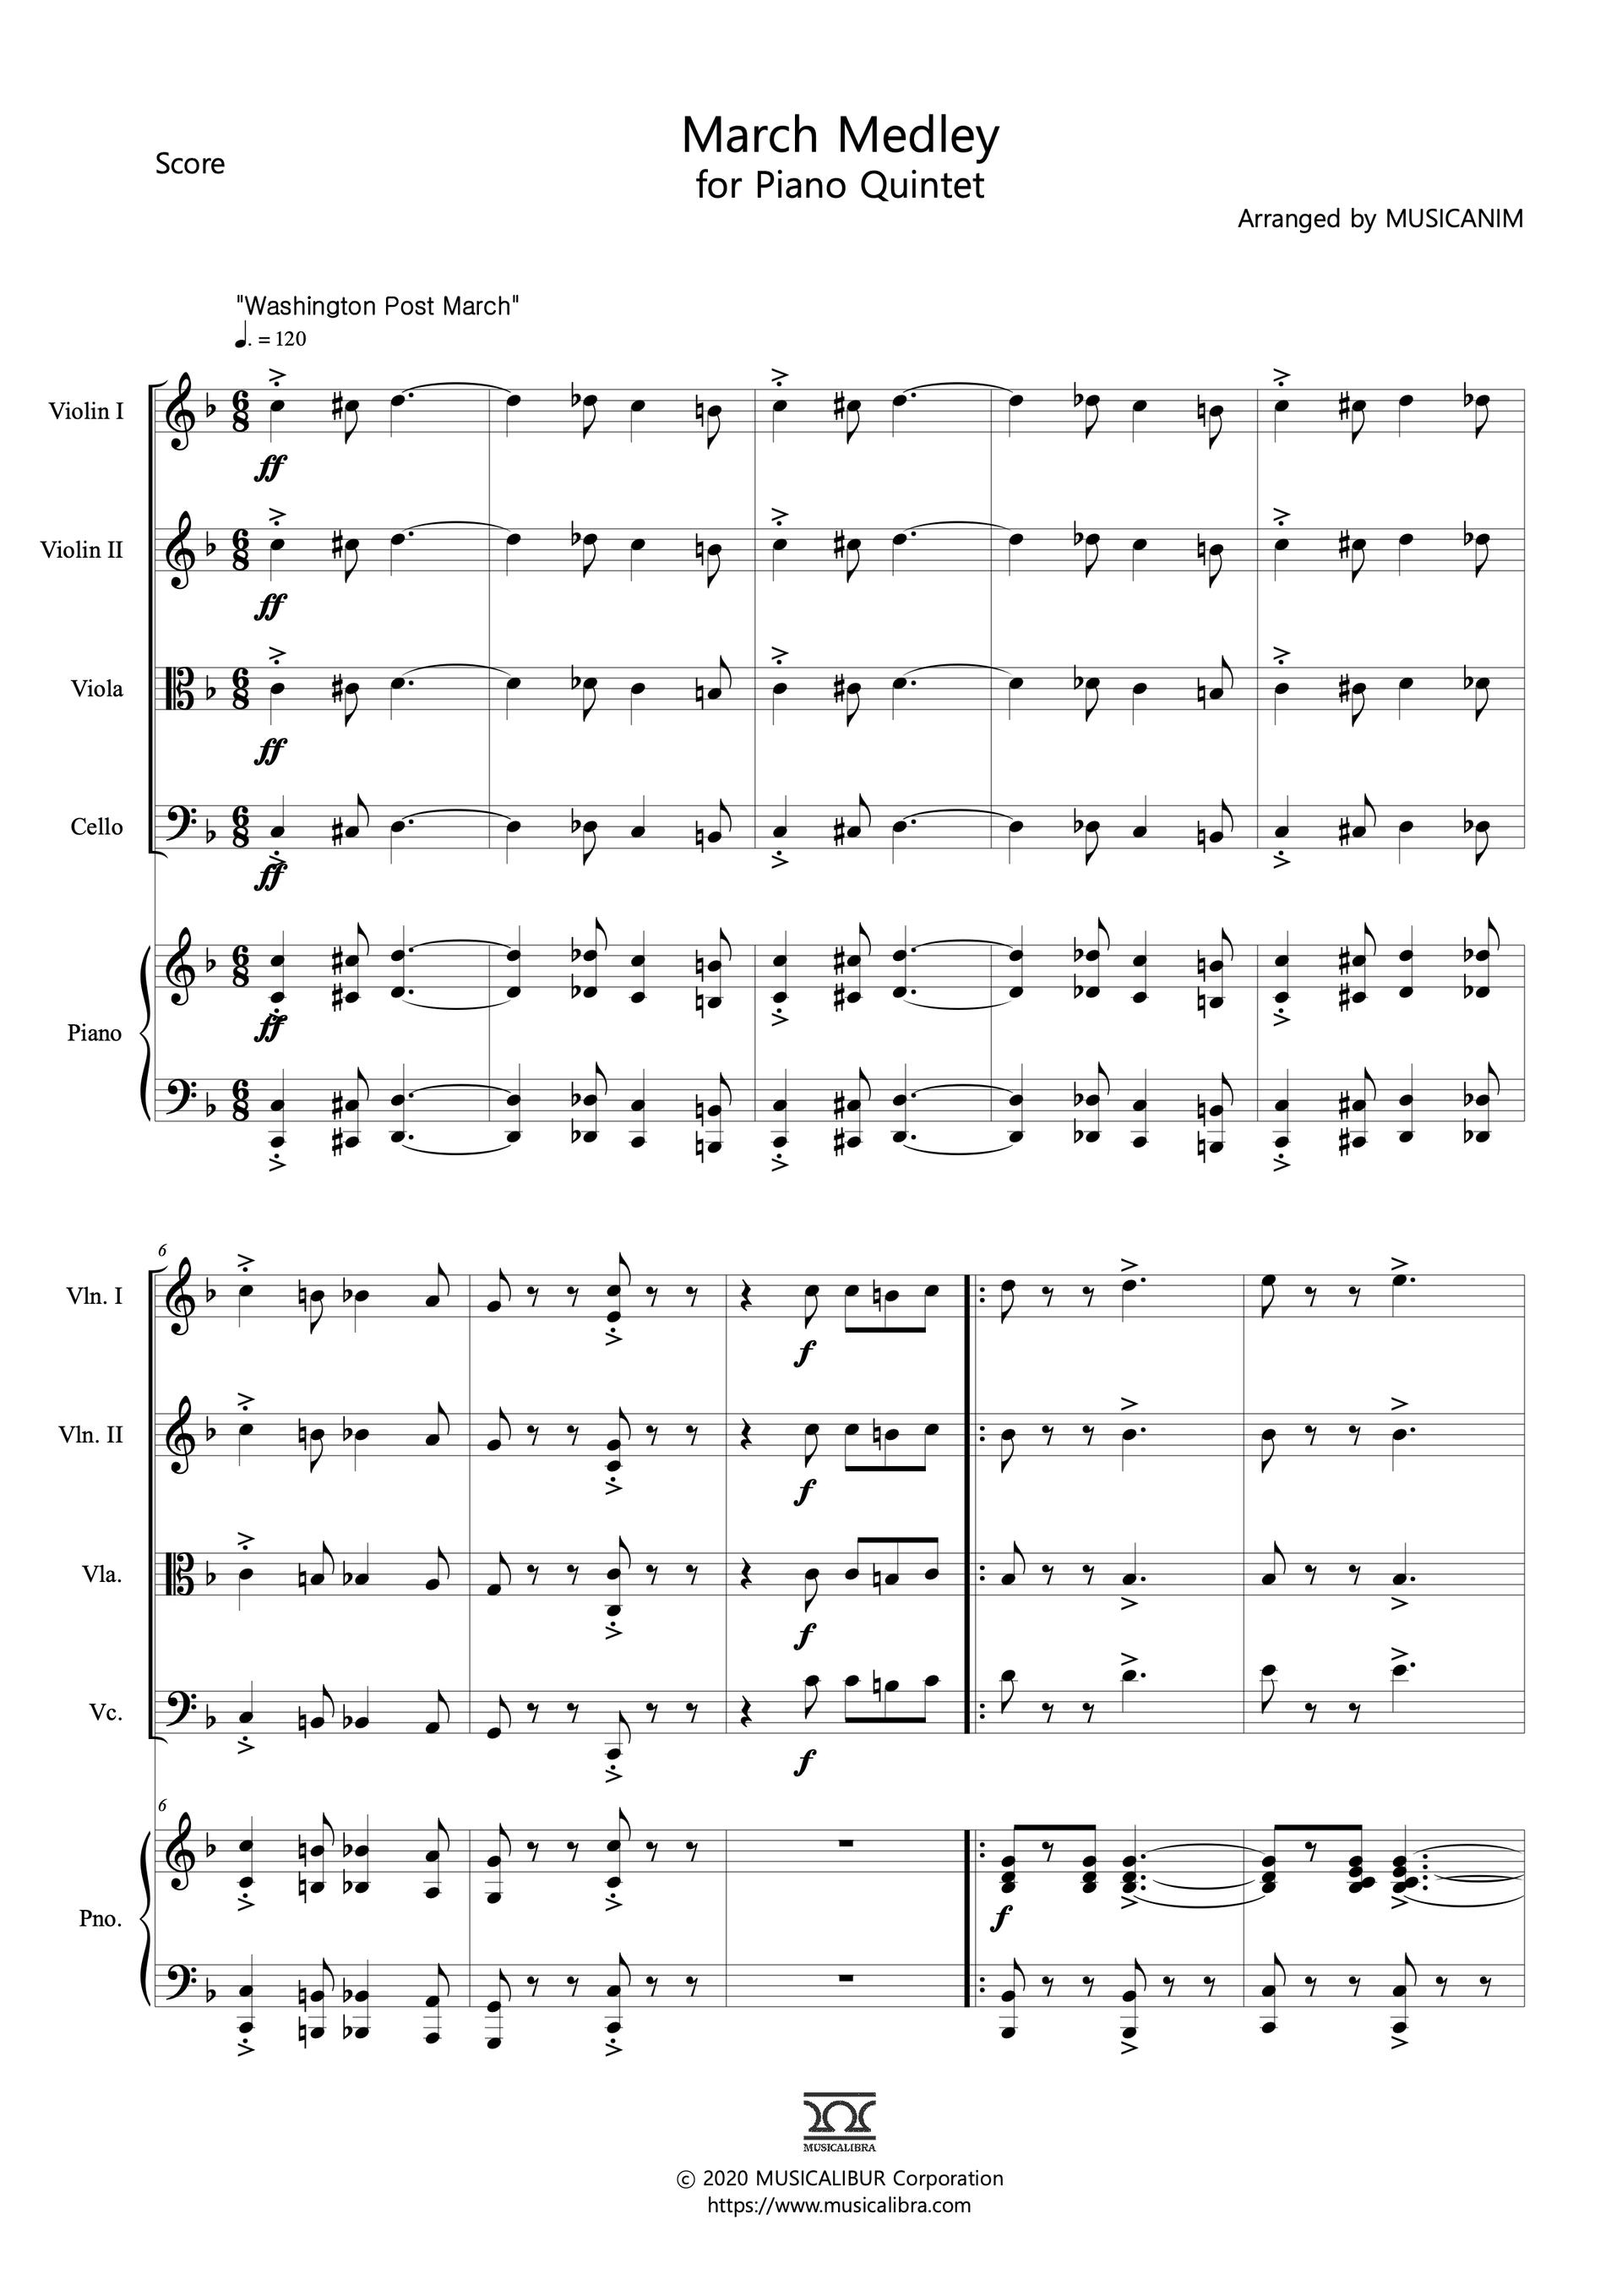 Sheet music of March Medley arranged for violins, viola, cello and piano quintet preview page 1